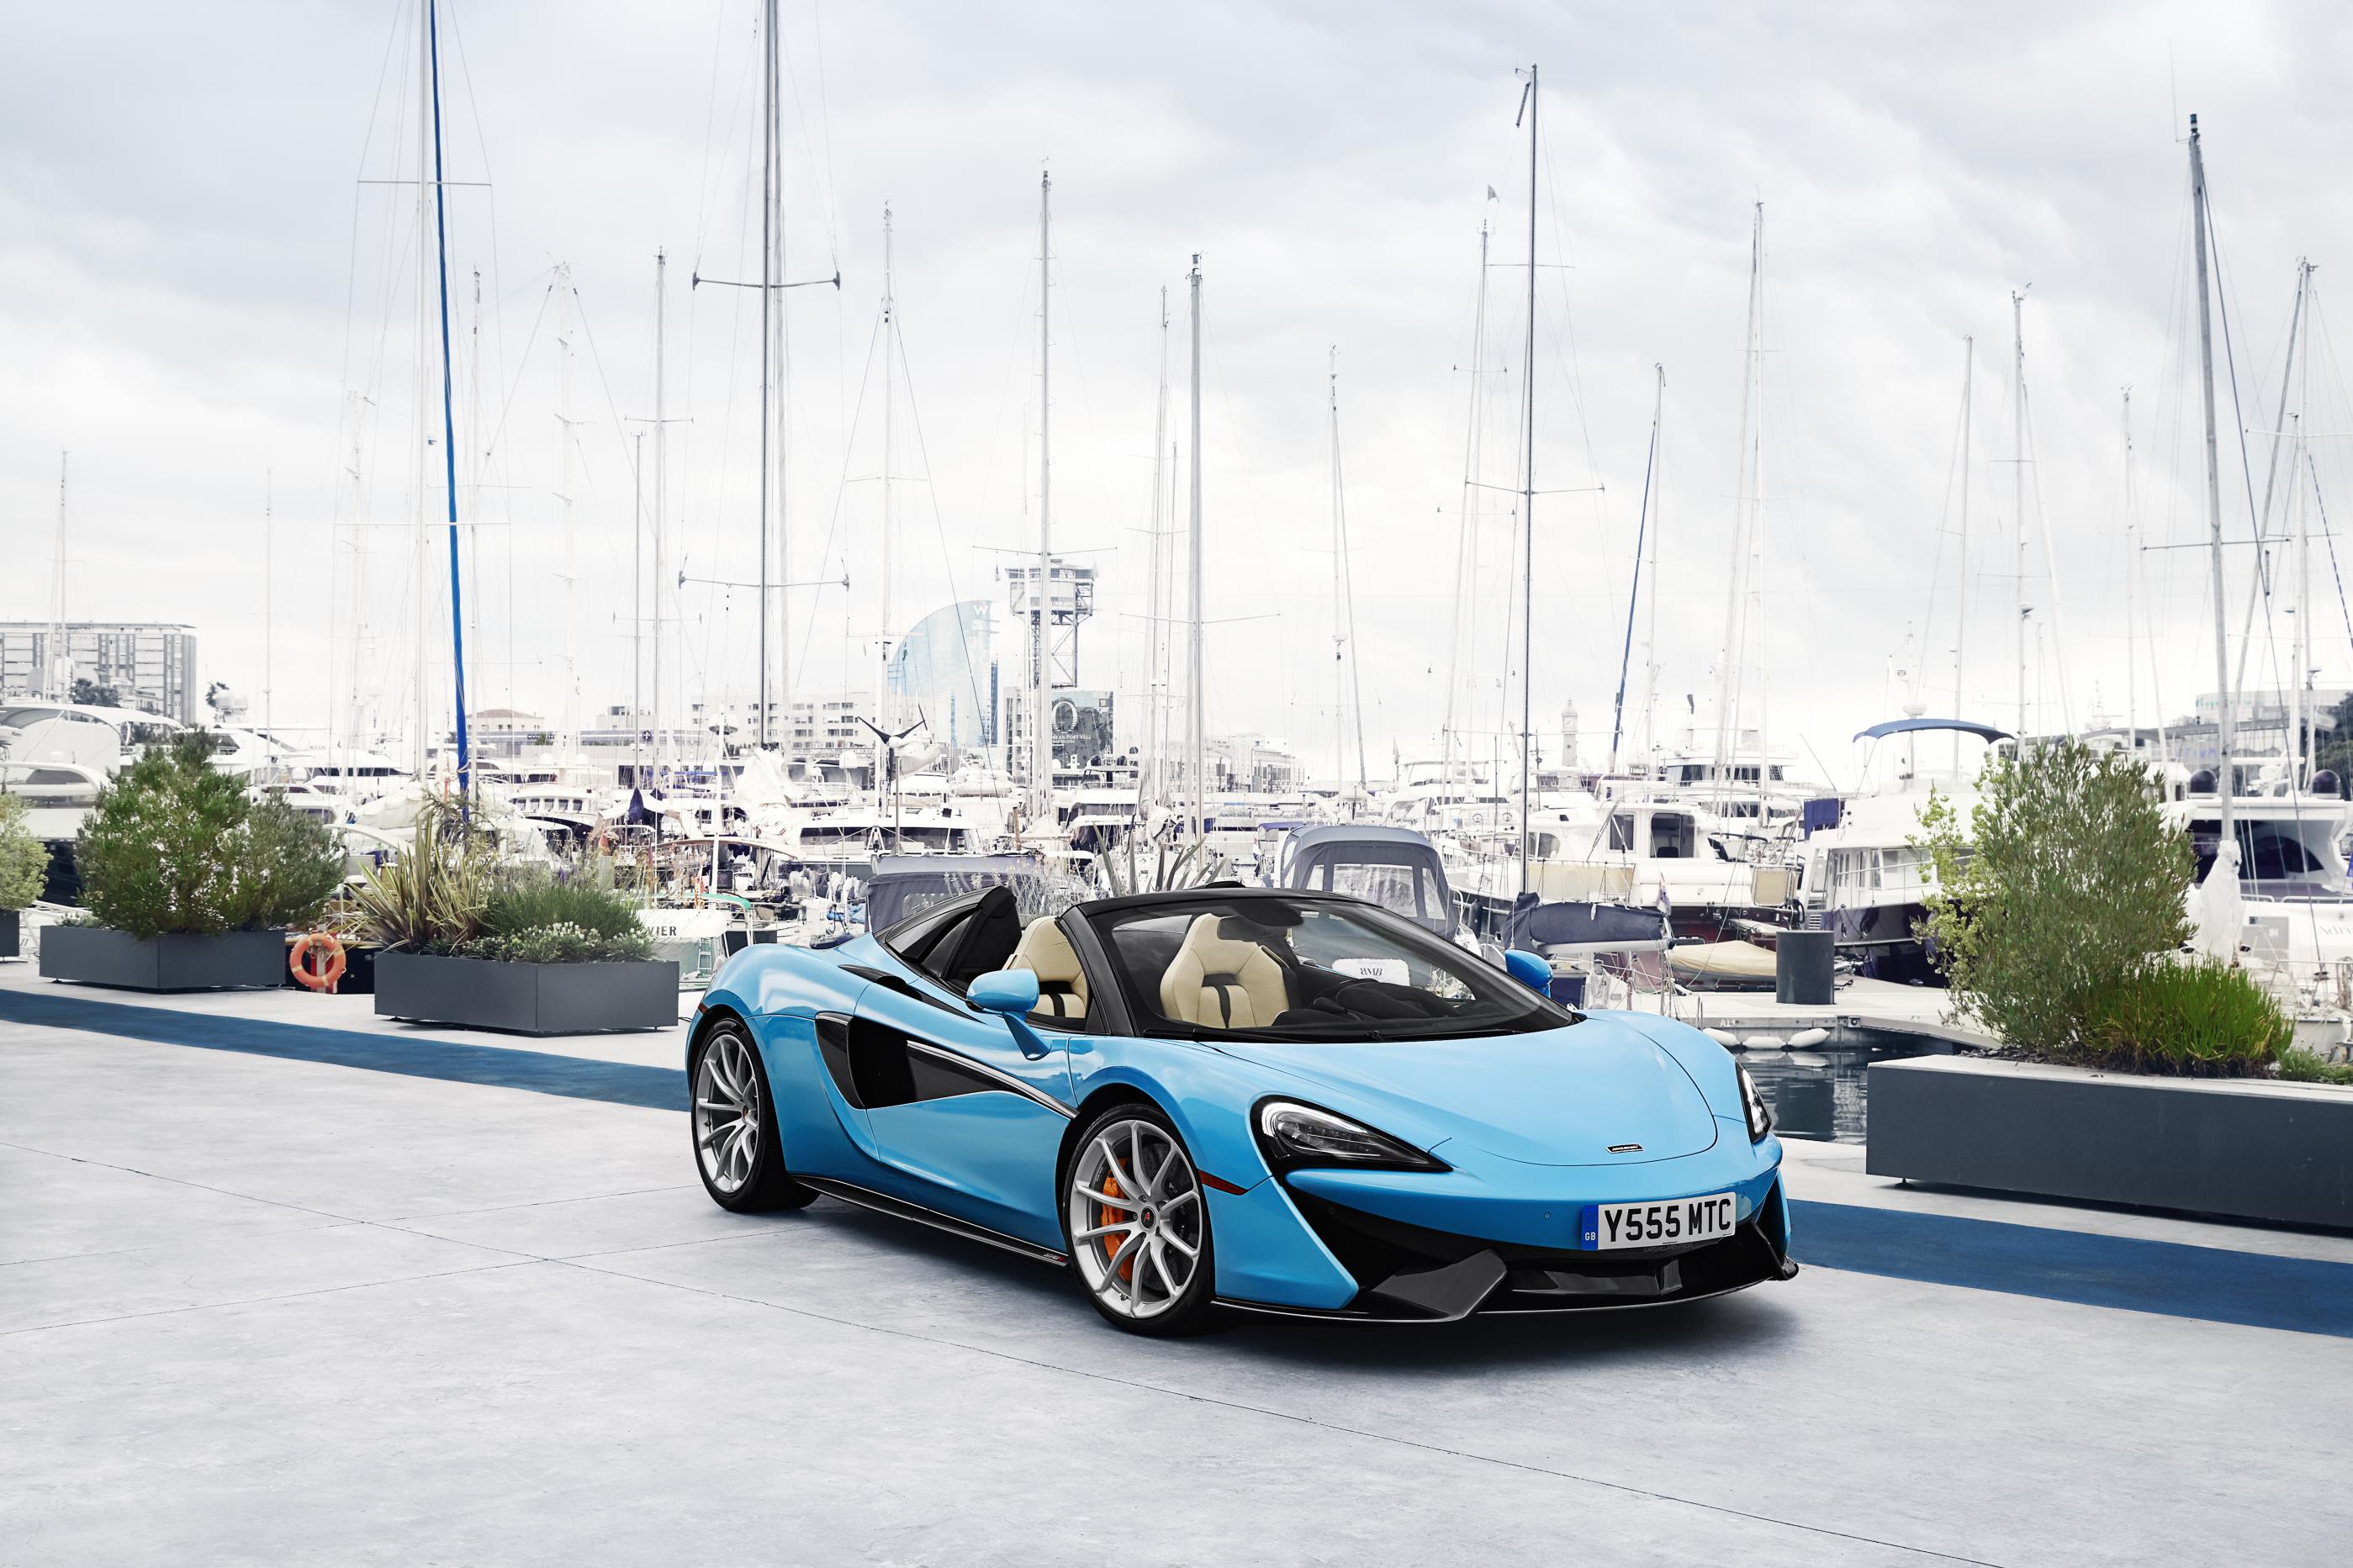 The McLaren 570S, which was launched in June. McLaren Automotive acheived another year of sales records in 2017.